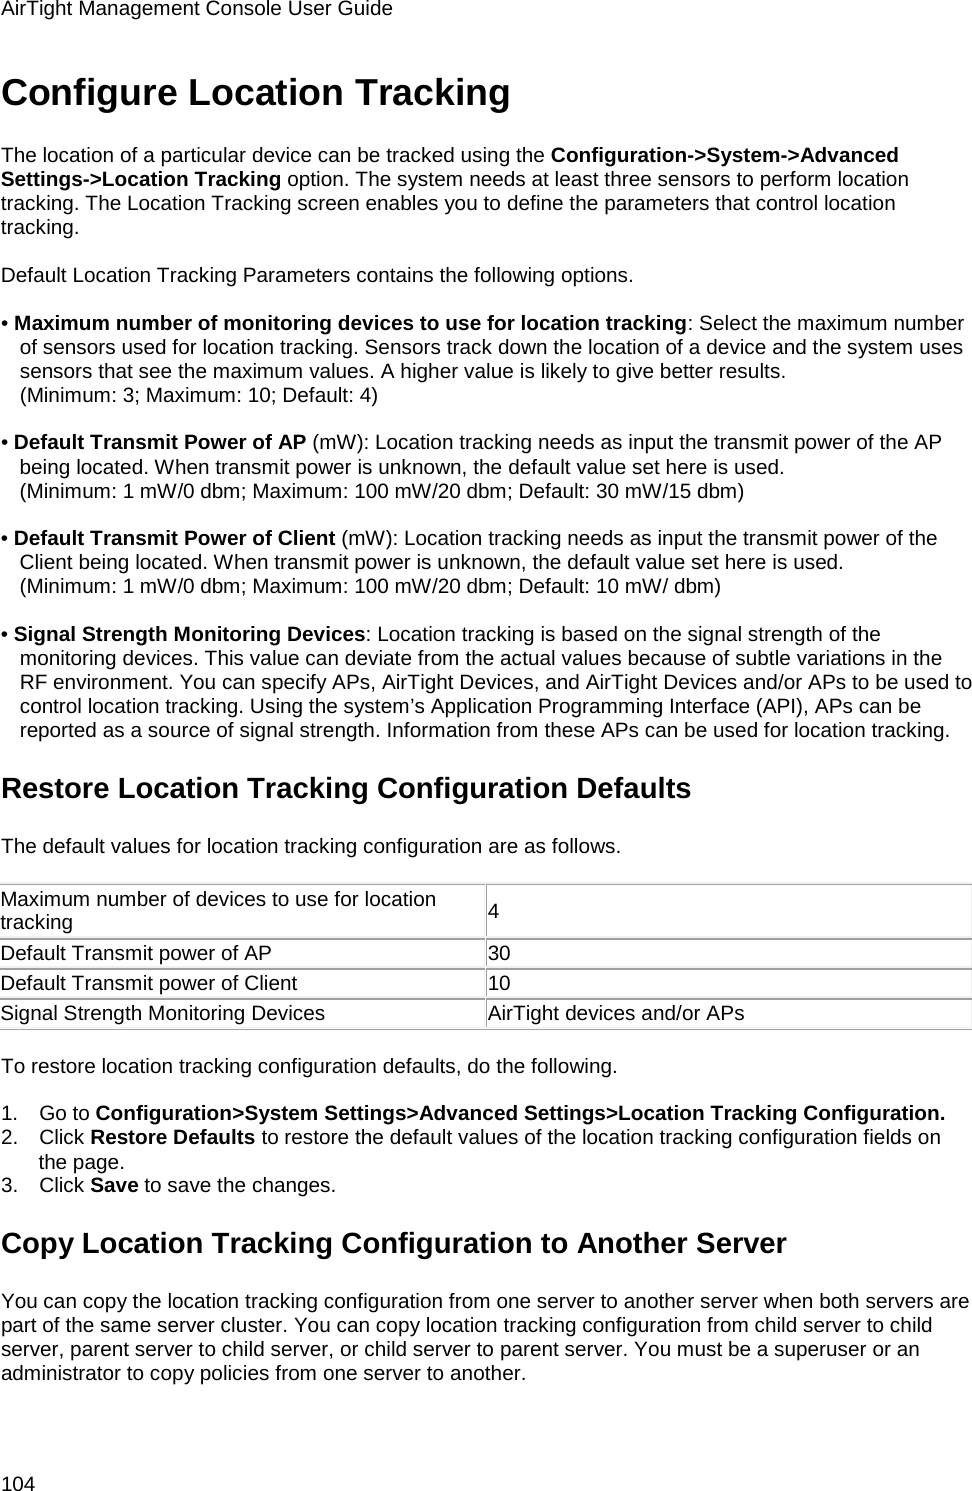 AirTight Management Console User Guide 104 Configure Location Tracking The location of a particular device can be tracked using the Configuration-&gt;System-&gt;Advanced Settings-&gt;Location Tracking option. The system needs at least three sensors to perform location tracking. The Location Tracking screen enables you to define the parameters that control location tracking.   Default Location Tracking Parameters contains the following options.   • Maximum number of monitoring devices to use for location tracking: Select the maximum number of sensors used for location tracking. Sensors track down the location of a device and the system uses sensors that see the maximum values. A higher value is likely to give better results. (Minimum: 3; Maximum: 10; Default: 4)   • Default Transmit Power of AP (mW): Location tracking needs as input the transmit power of the AP being located. When transmit power is unknown, the default value set here is used. (Minimum: 1 mW/0 dbm; Maximum: 100 mW/20 dbm; Default: 30 mW/15 dbm)   • Default Transmit Power of Client (mW): Location tracking needs as input the transmit power of the Client being located. When transmit power is unknown, the default value set here is used. (Minimum: 1 mW/0 dbm; Maximum: 100 mW/20 dbm; Default: 10 mW/ dbm)   • Signal Strength Monitoring Devices: Location tracking is based on the signal strength of the monitoring devices. This value can deviate from the actual values because of subtle variations in the RF environment. You can specify APs, AirTight Devices, and AirTight Devices and/or APs to be used to control location tracking. Using the system’s Application Programming Interface (API), APs can be reported as a source of signal strength. Information from these APs can be used for location tracking. Restore Location Tracking Configuration Defaults The default values for location tracking configuration are as follows.   Maximum number of devices to use for location tracking 4 Default Transmit power of AP 30 Default Transmit power of Client 10 Signal Strength Monitoring Devices AirTight devices and/or APs   To restore location tracking configuration defaults, do the following.   1.      Go to Configuration&gt;System Settings&gt;Advanced Settings&gt;Location Tracking Configuration. 2.      Click Restore Defaults to restore the default values of the location tracking configuration fields on the page. 3.      Click Save to save the changes. Copy Location Tracking Configuration to Another Server You can copy the location tracking configuration from one server to another server when both servers are part of the same server cluster. You can copy location tracking configuration from child server to child server, parent server to child server, or child server to parent server. You must be a superuser or an administrator to copy policies from one server to another.   